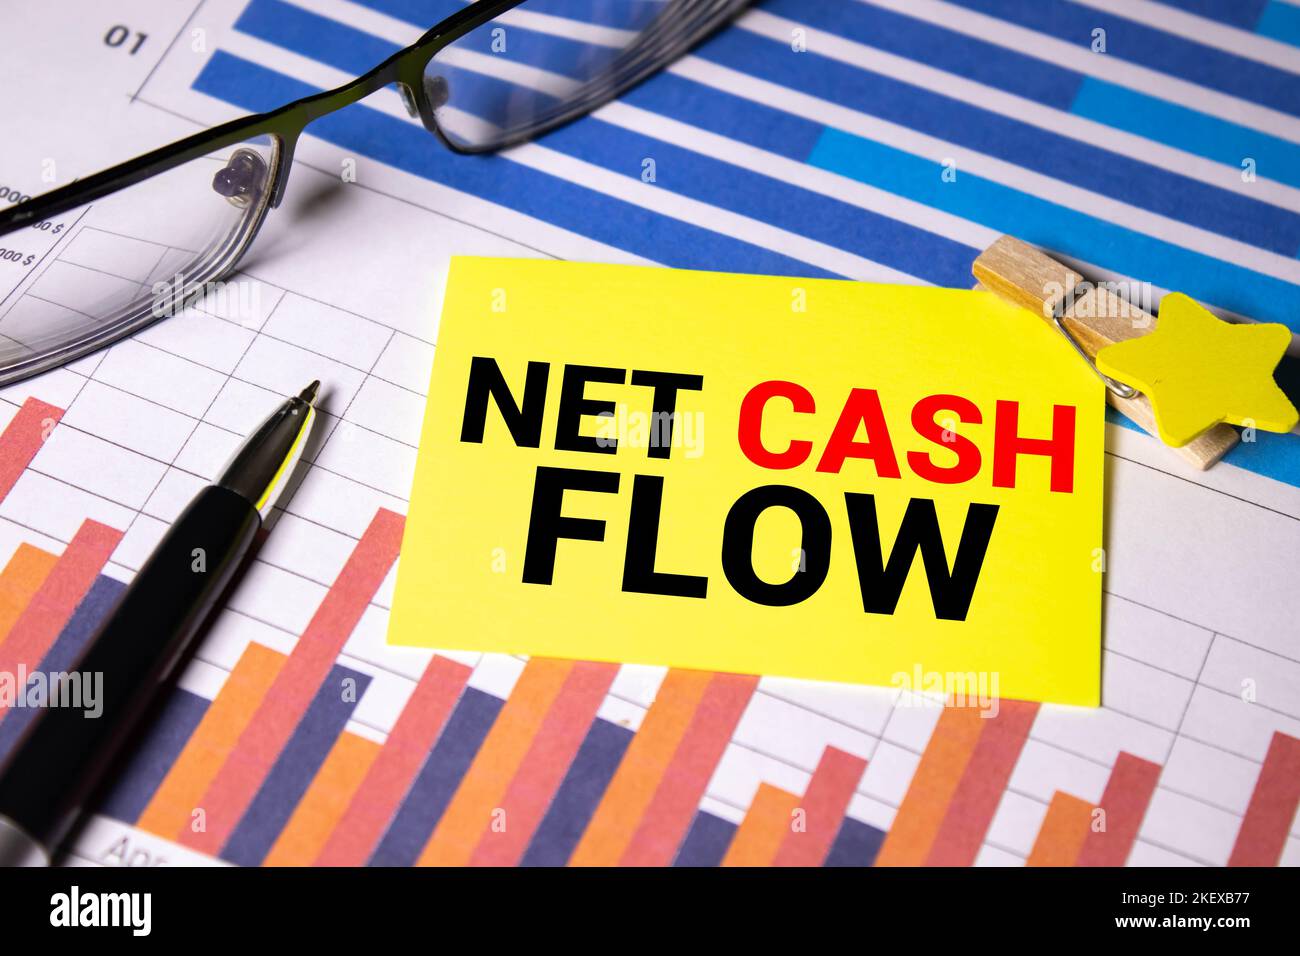 Net Cash Flow is shown using a text. Stock Photo